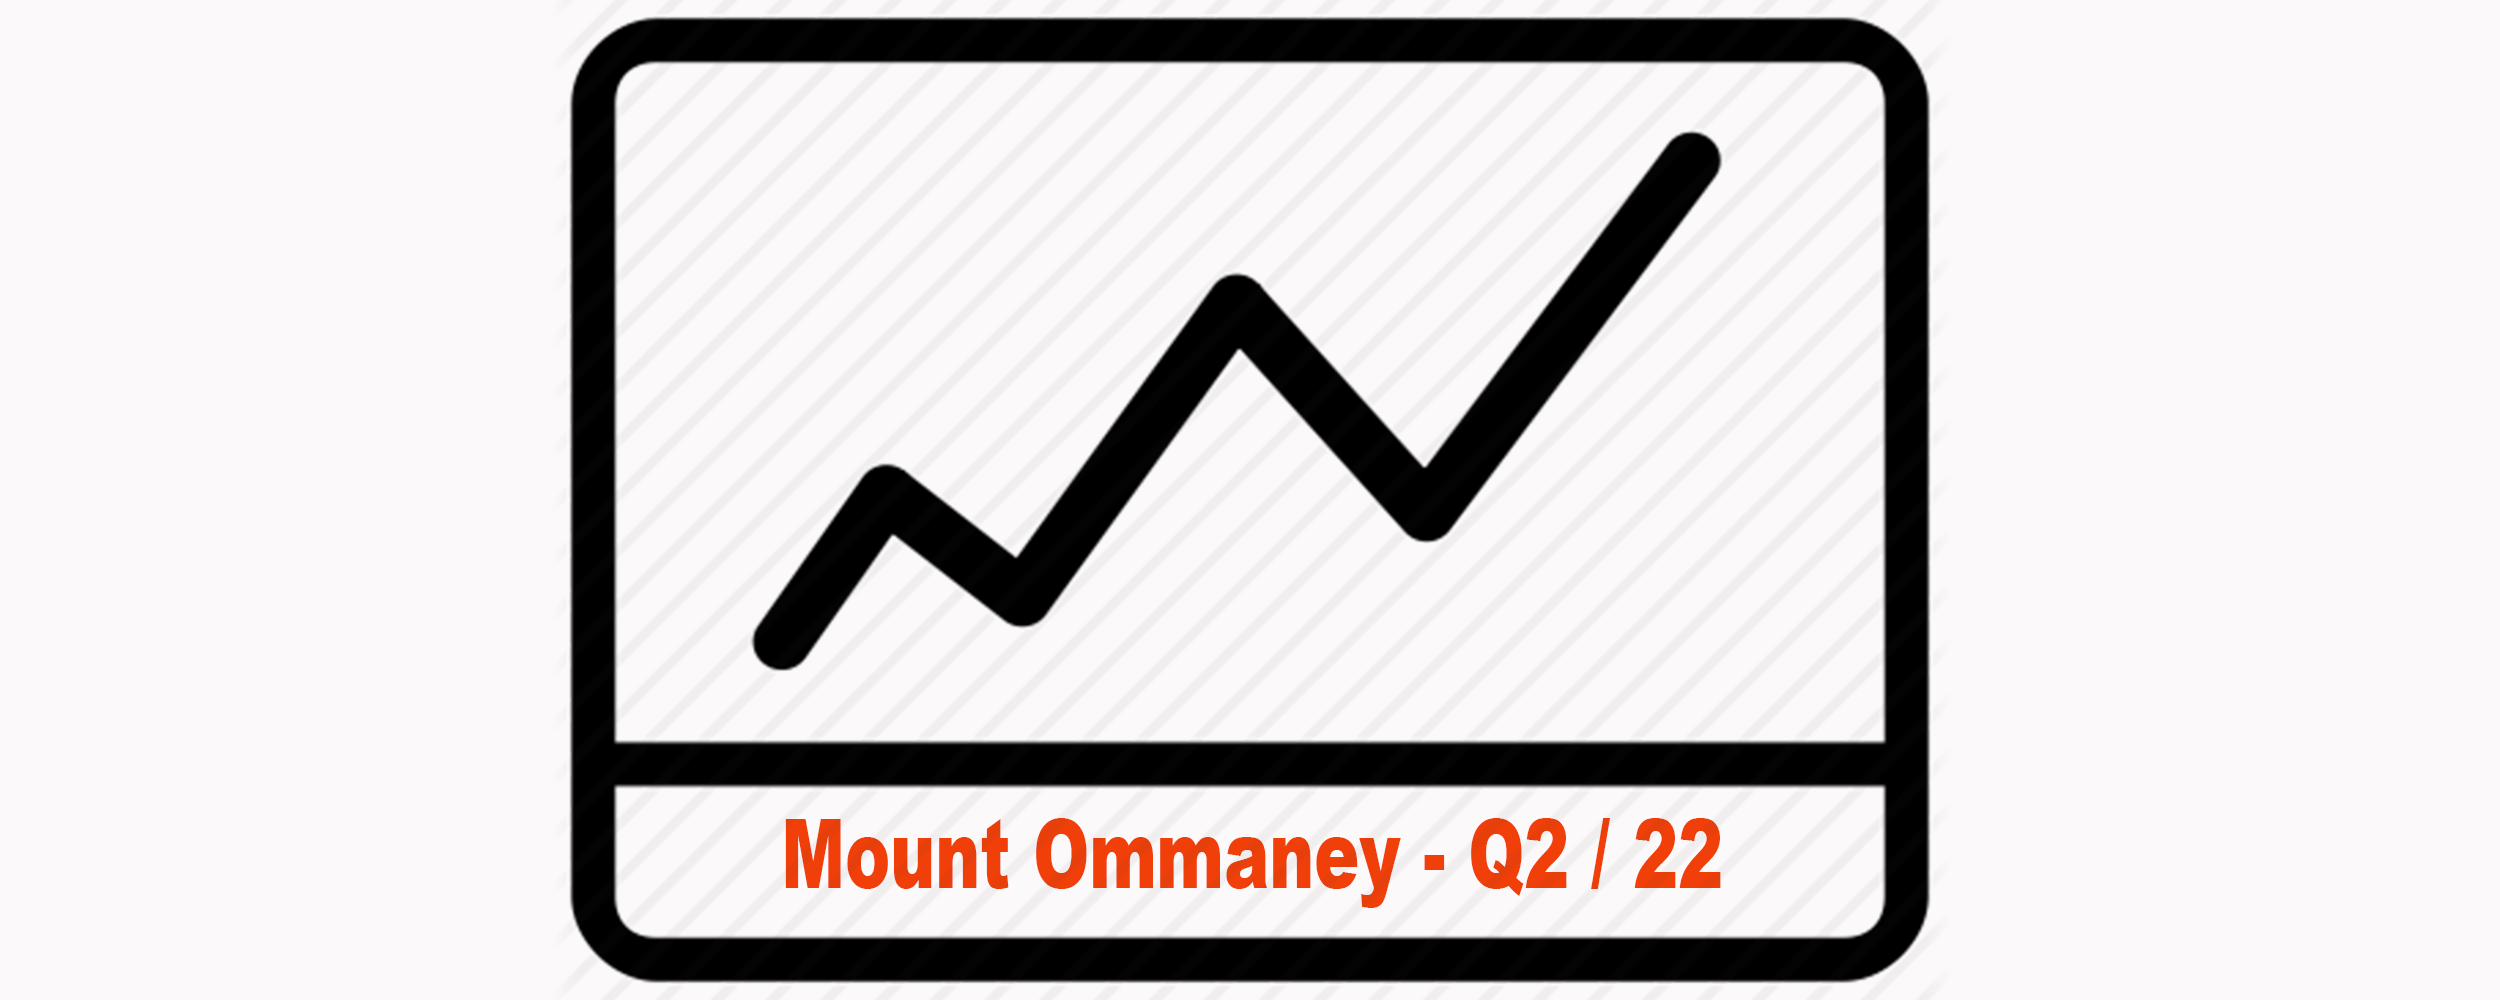 Your Local Market - Q2 / 2022 Mount Ommaney